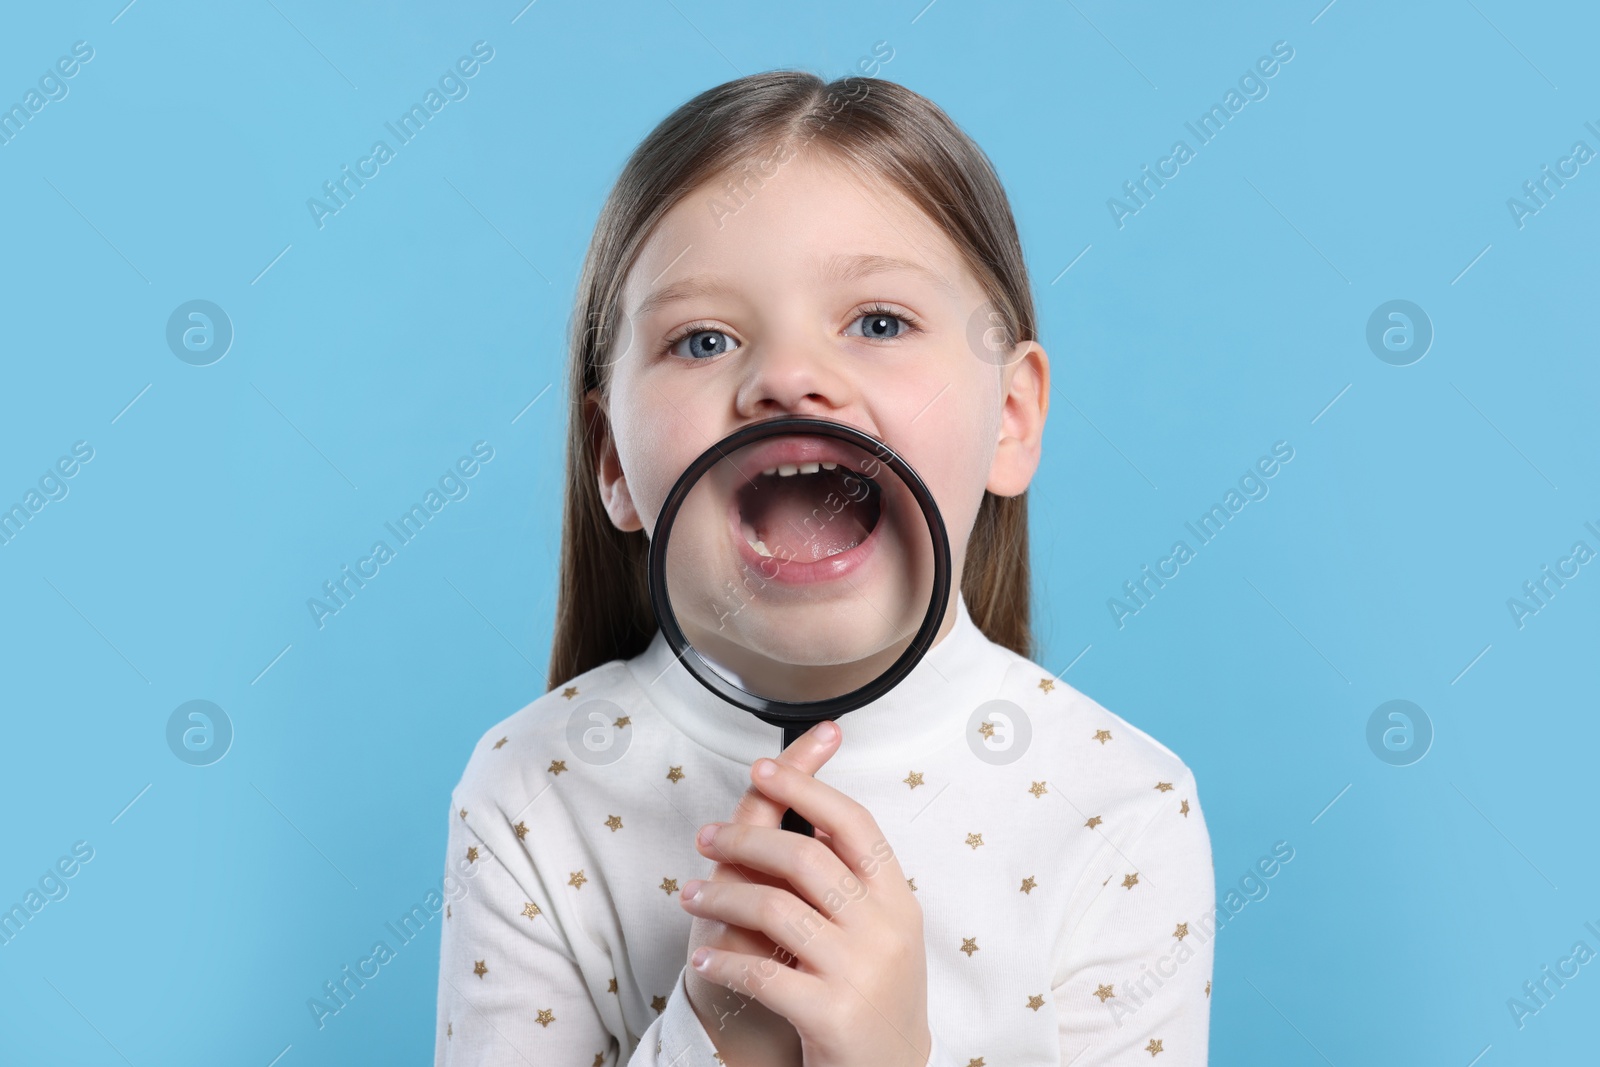 Photo of Cute little girl holding magnifier glass near her face on light blue background